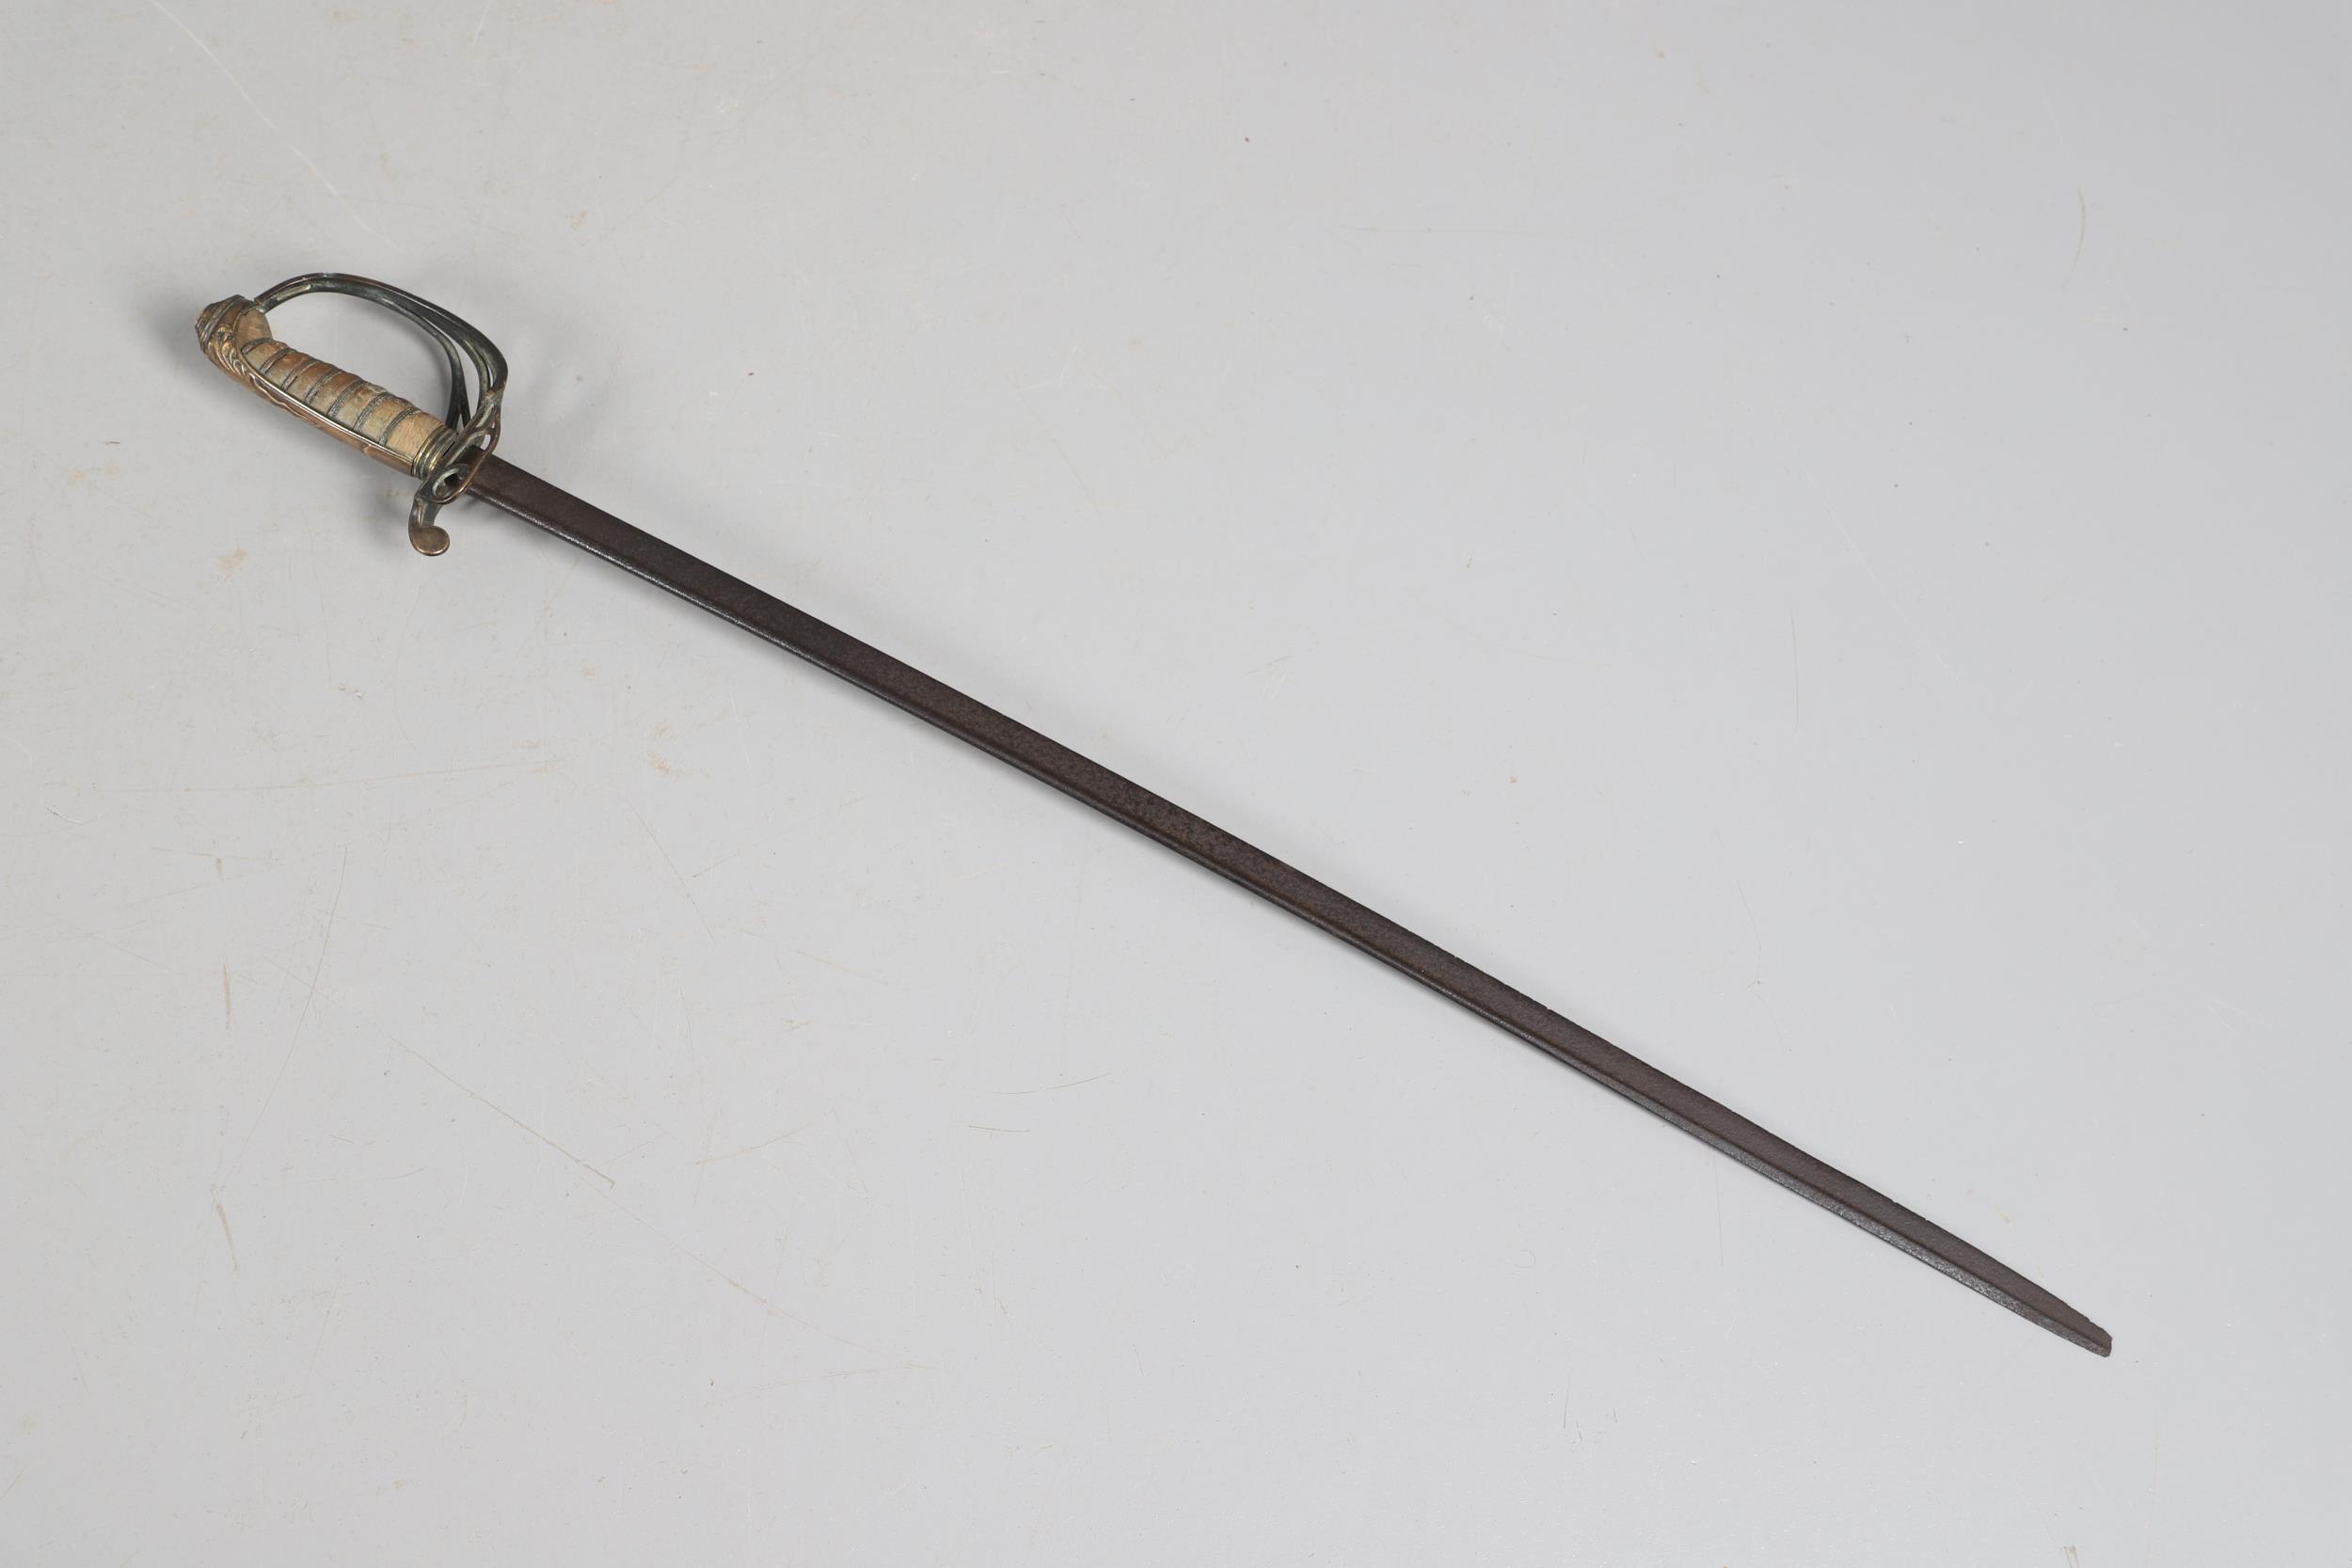 AN EAST INDIA COMPANY OFFICER'S 1822 PATTERN SWORD. - Image 7 of 10